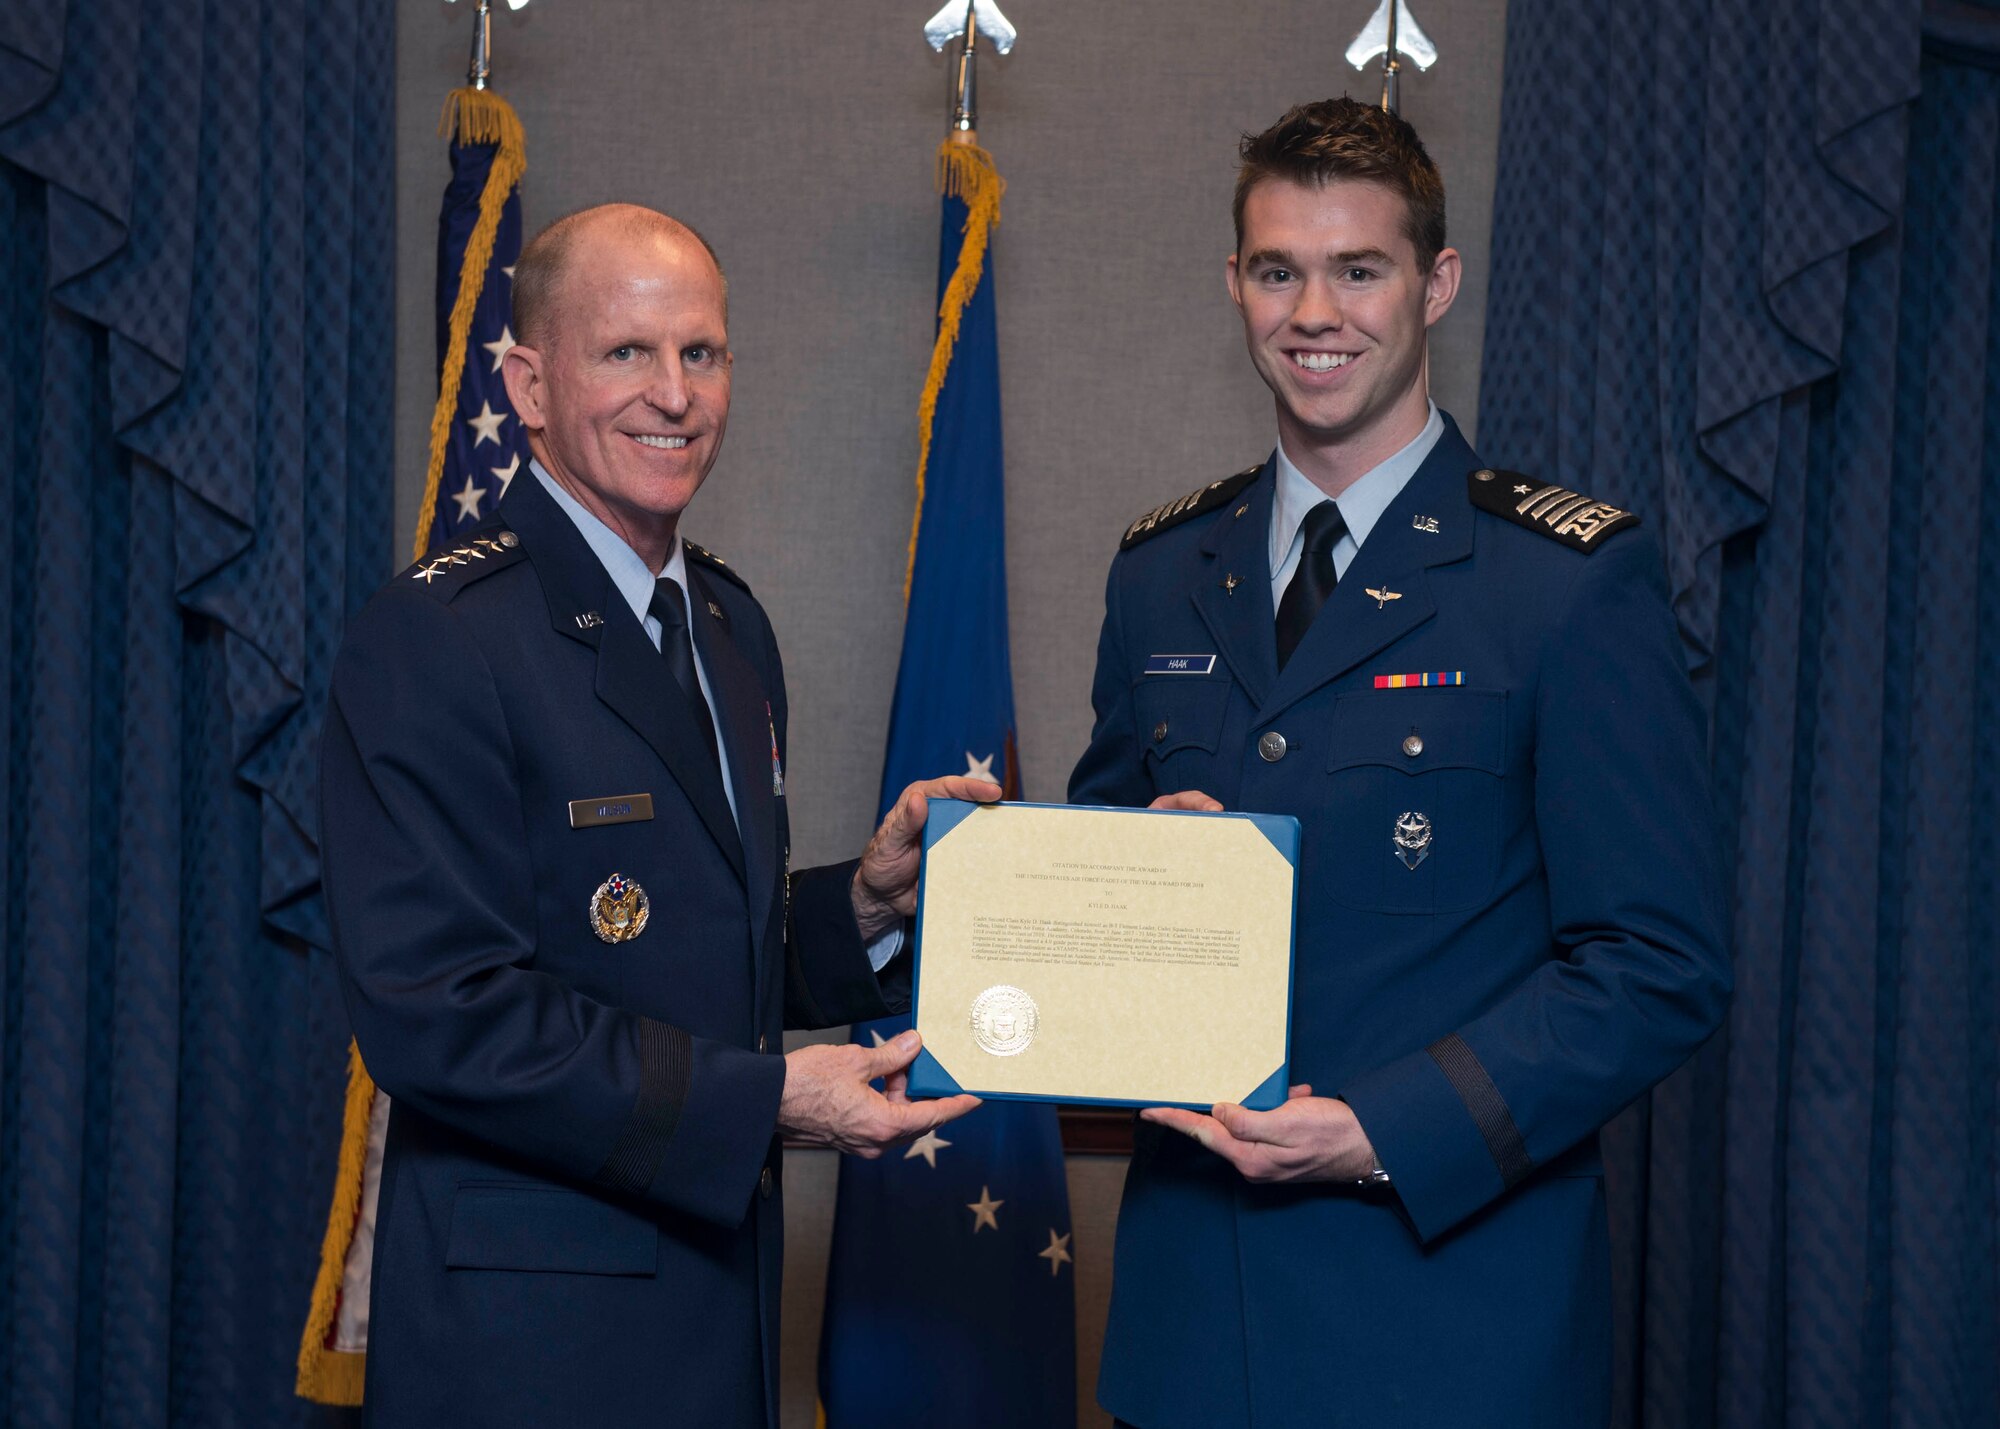 Cadet 2nd Class Kyle Haak receives the 2018 U.S. Air Force Cadet of the Year award from Air Force Vice Chief of Staff Gen. Stephen V. Wilson during a ceremony at the Pentagon, Arlington, Va., Nov. 6, 2018. Established in 2000 by the private British Air Squadron organization, the award is a symbol of the enduring British-American friendship. (U.S. Air Force photo by Staff Sgt. Victoria H. Taylor)